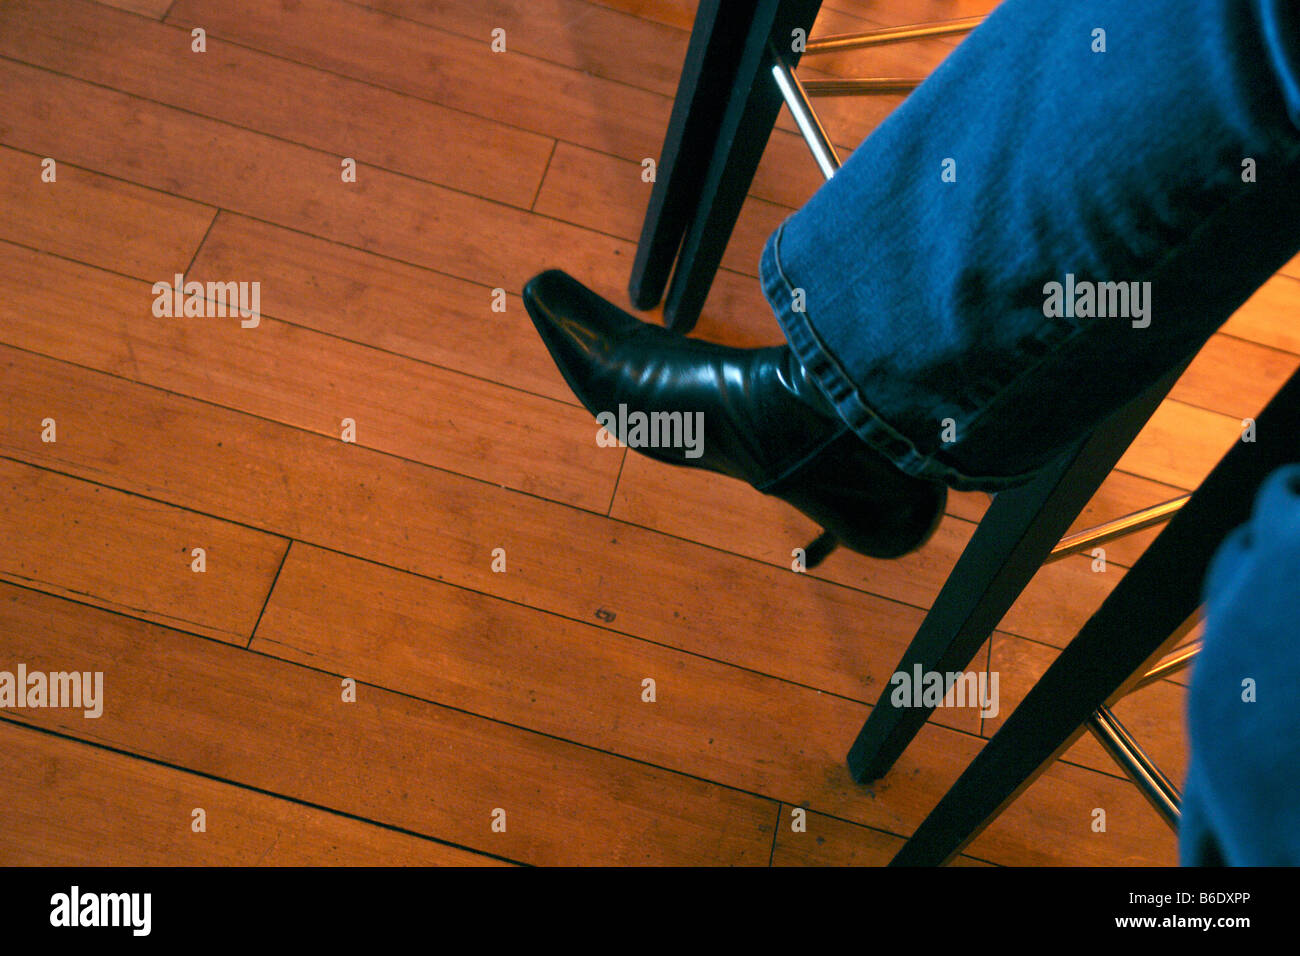 Photograph of the Leg and Foot of a Woman Wearing Blue Jeans and Black Boots Sitting on a Stool on a Wooden Floor Copy Space Stock Photo